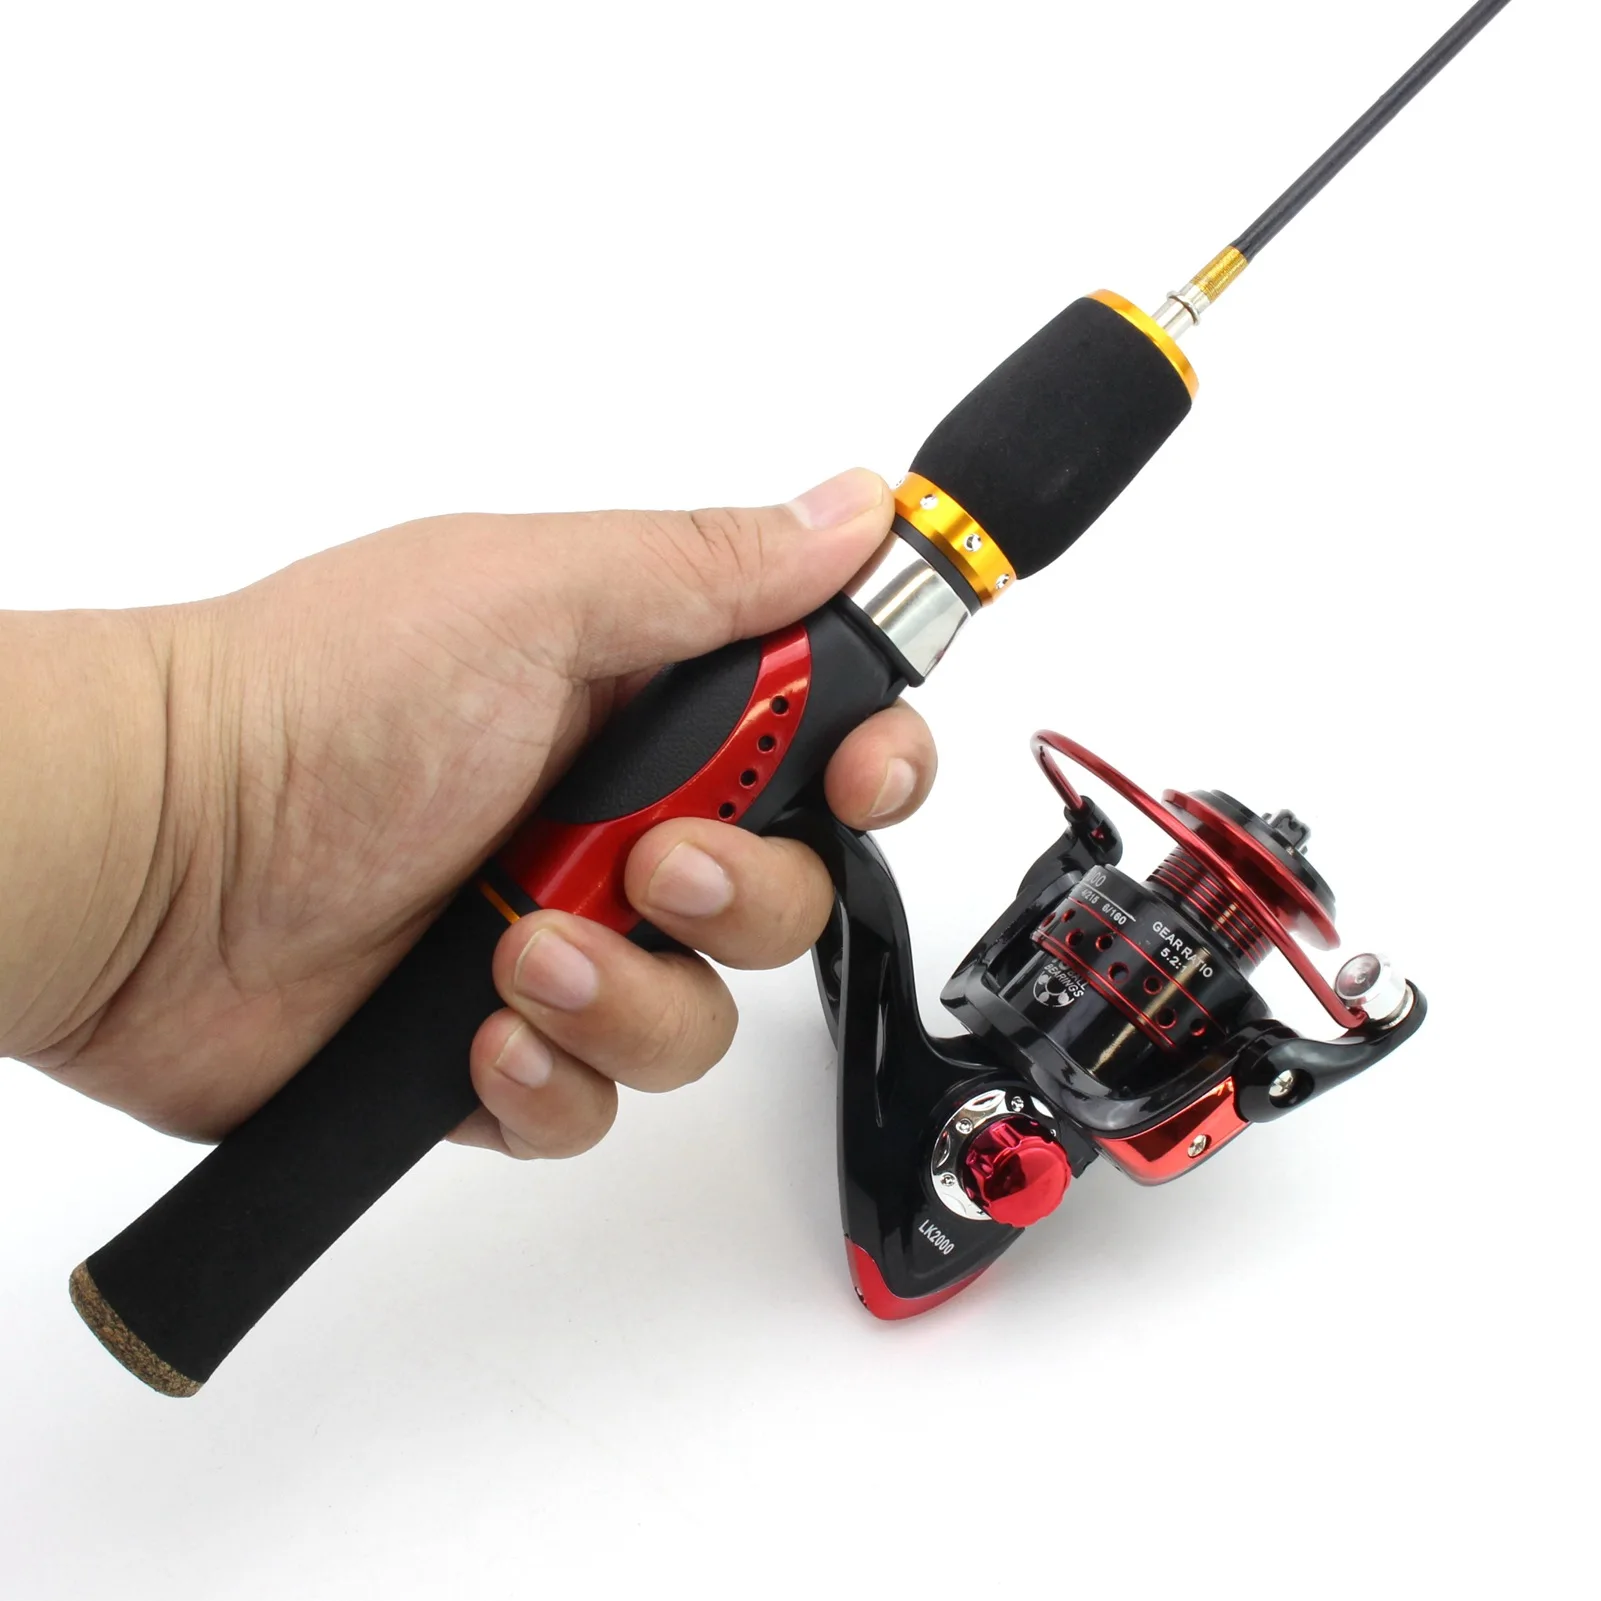 New Ice Fishing Rod and Reel Combo Ultralight Carbon Fiber 67cm 2Tips Raft Winter Maximum Fishing Weight 4kg Short Spinning Pole enlarge